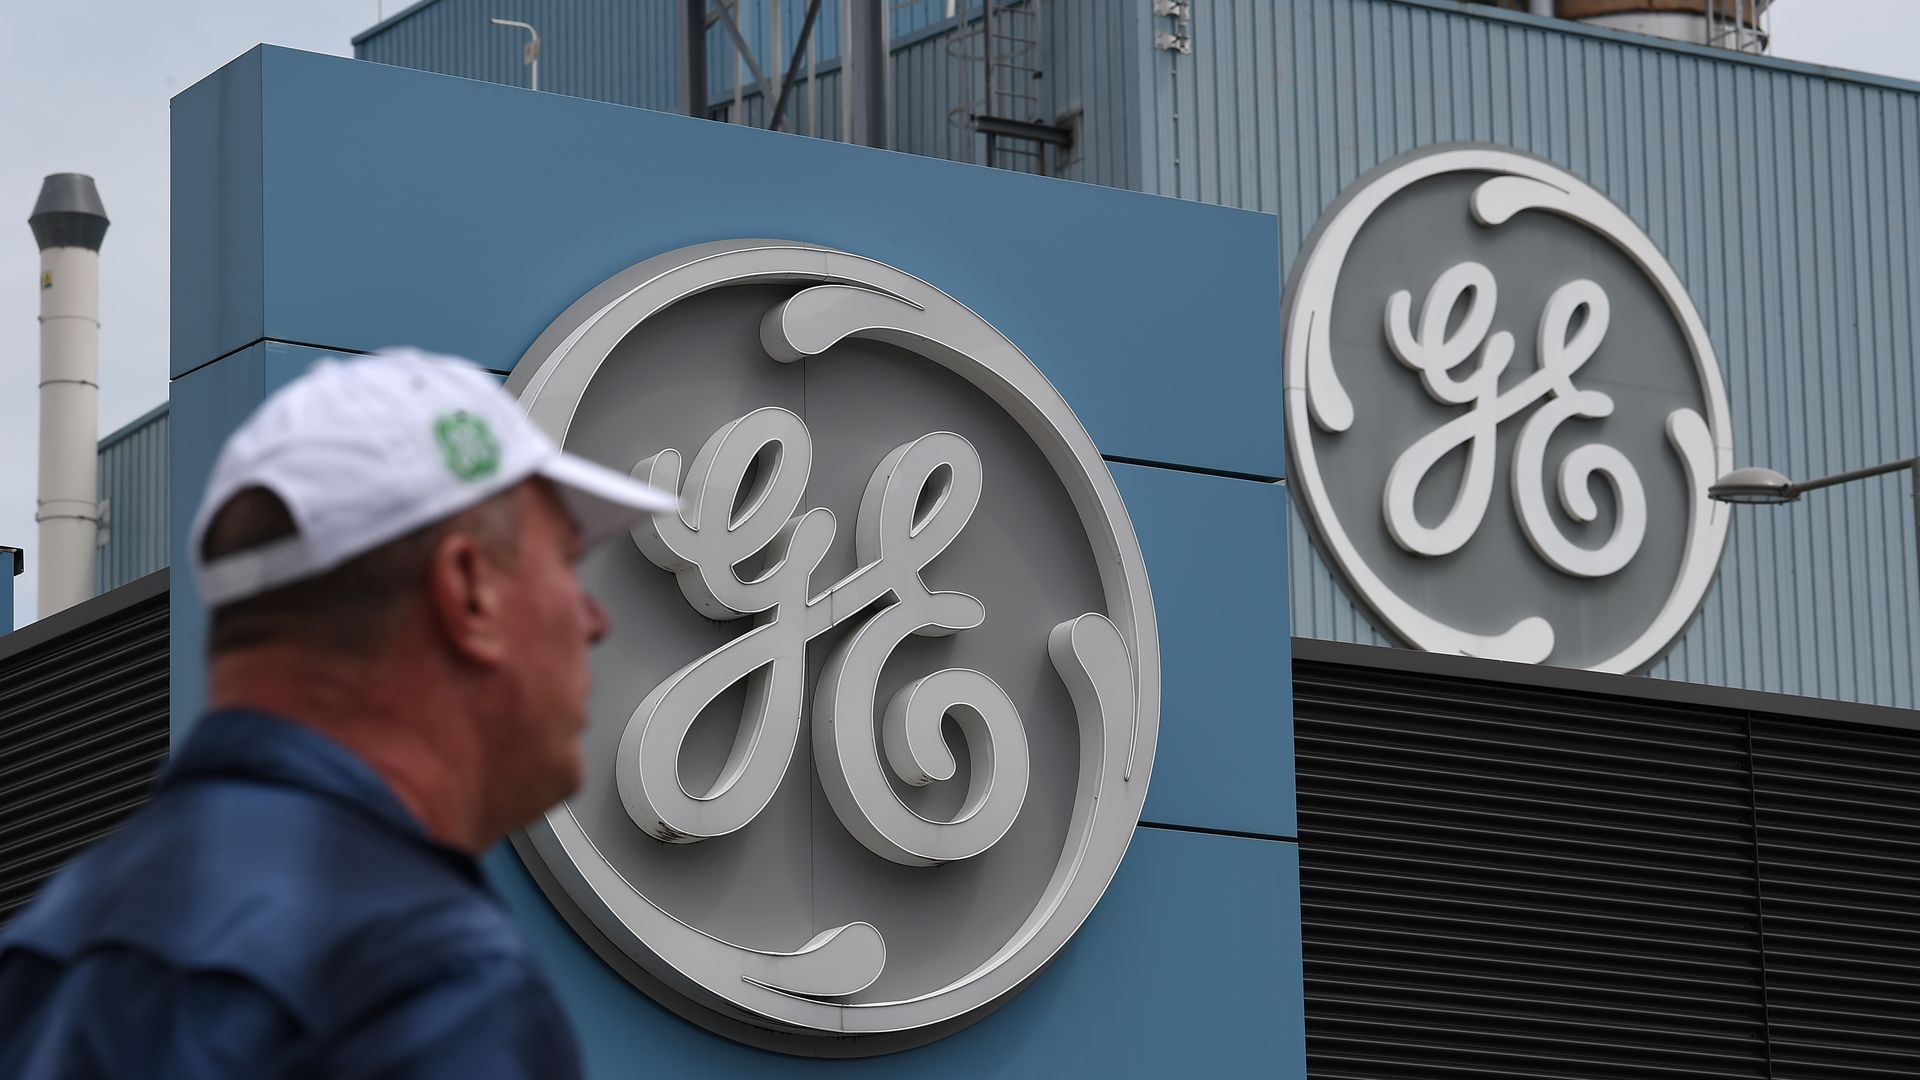 In this image, a man wearing a baseball cap walks in front of a building with a giant General Electric logo.